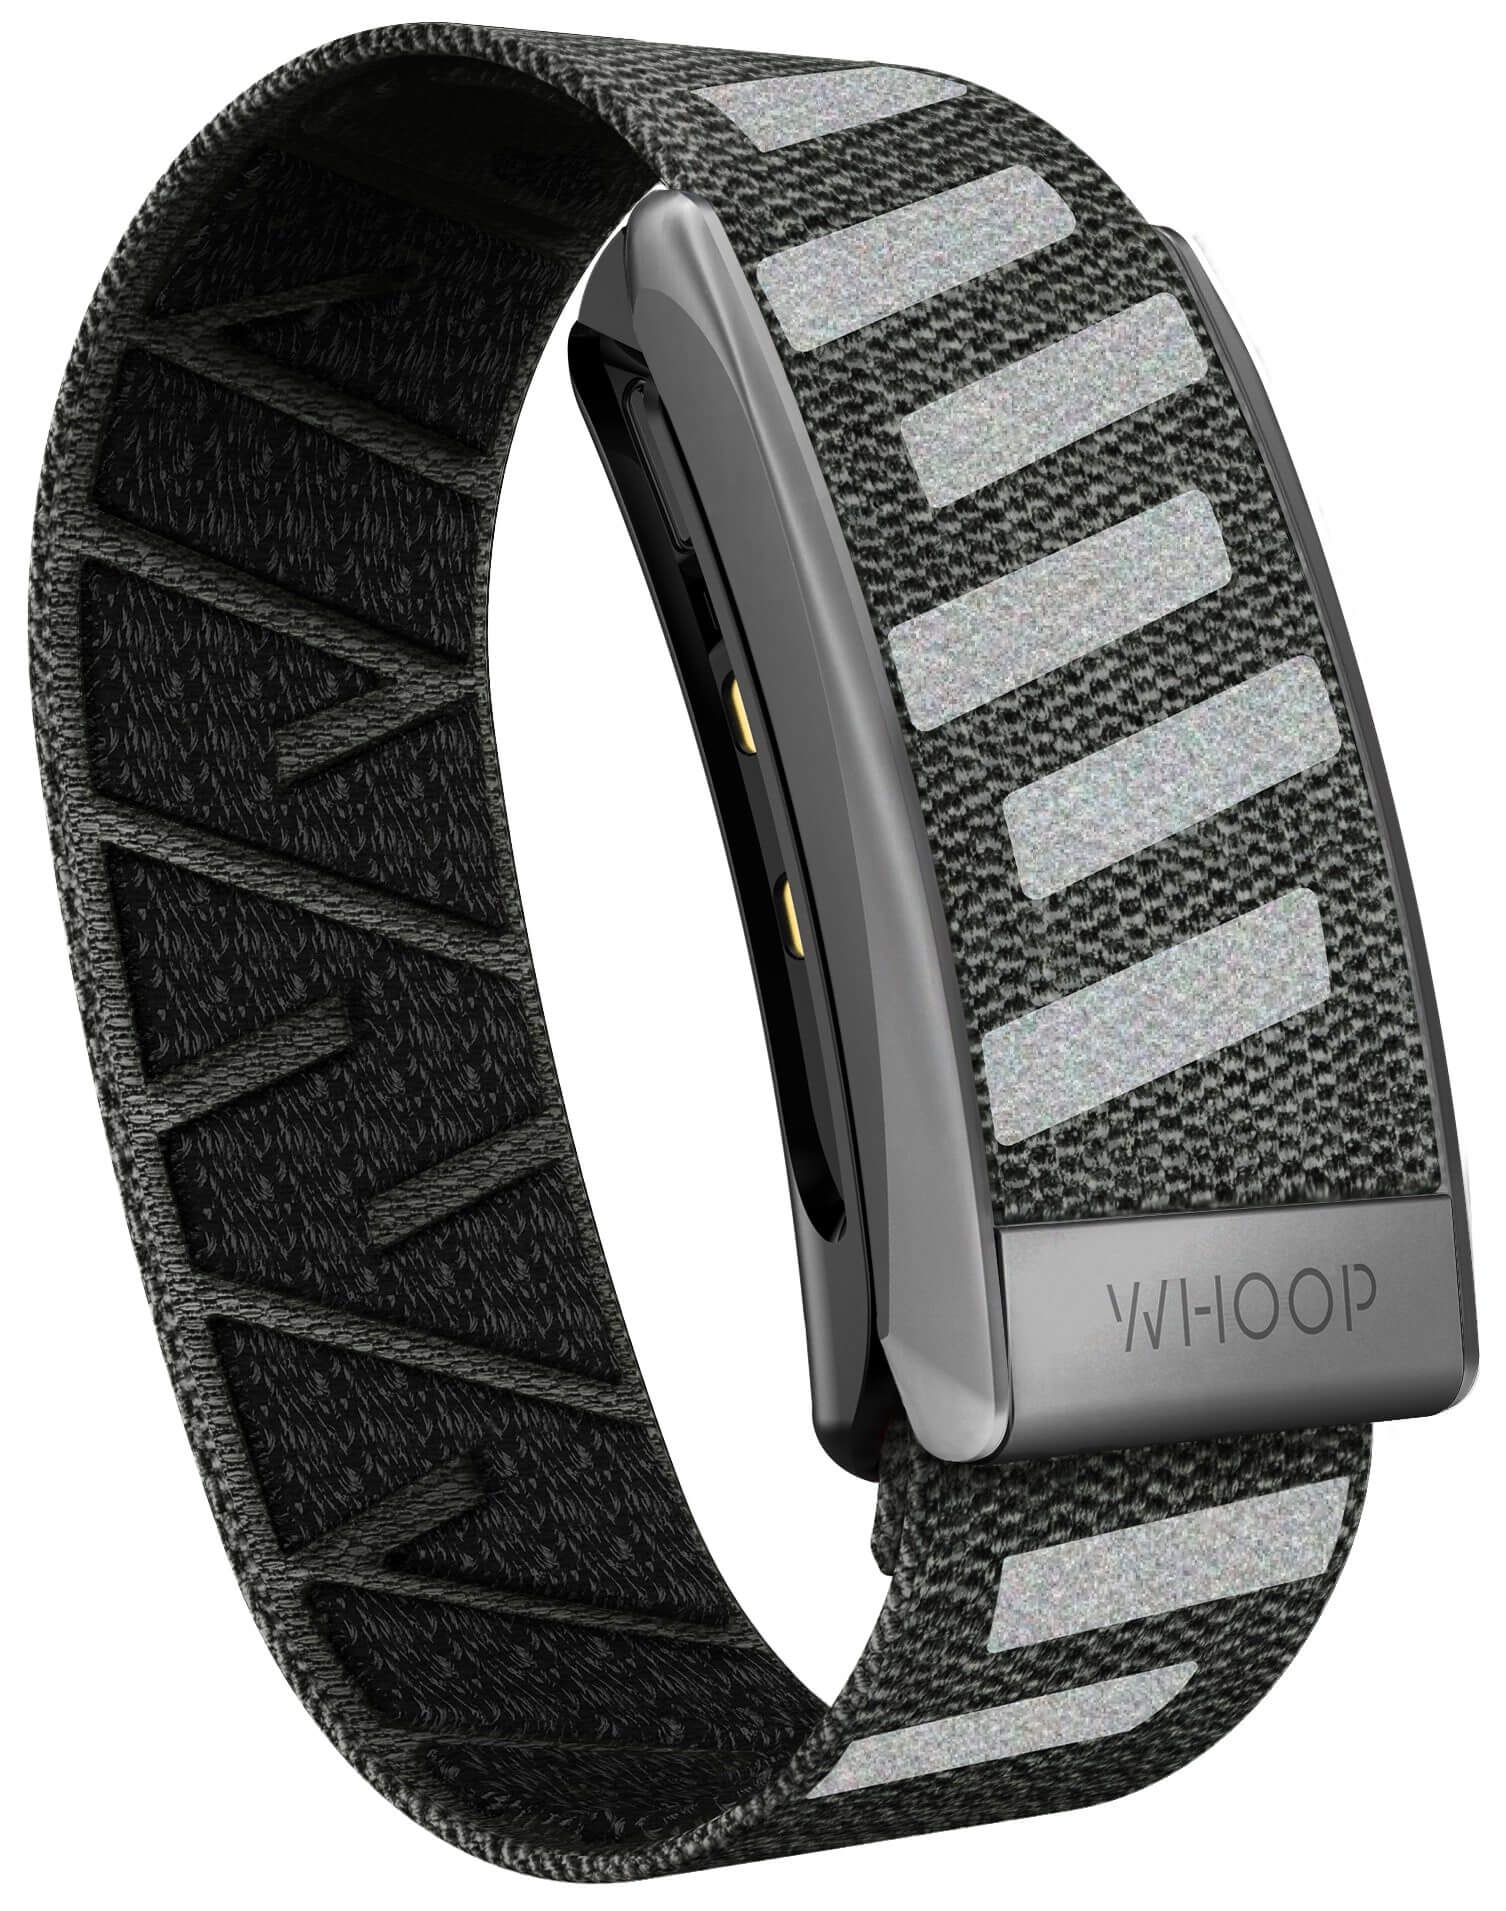 How to Monitor Your Recovery, Strain, and Sleep with the WHOOP Strap